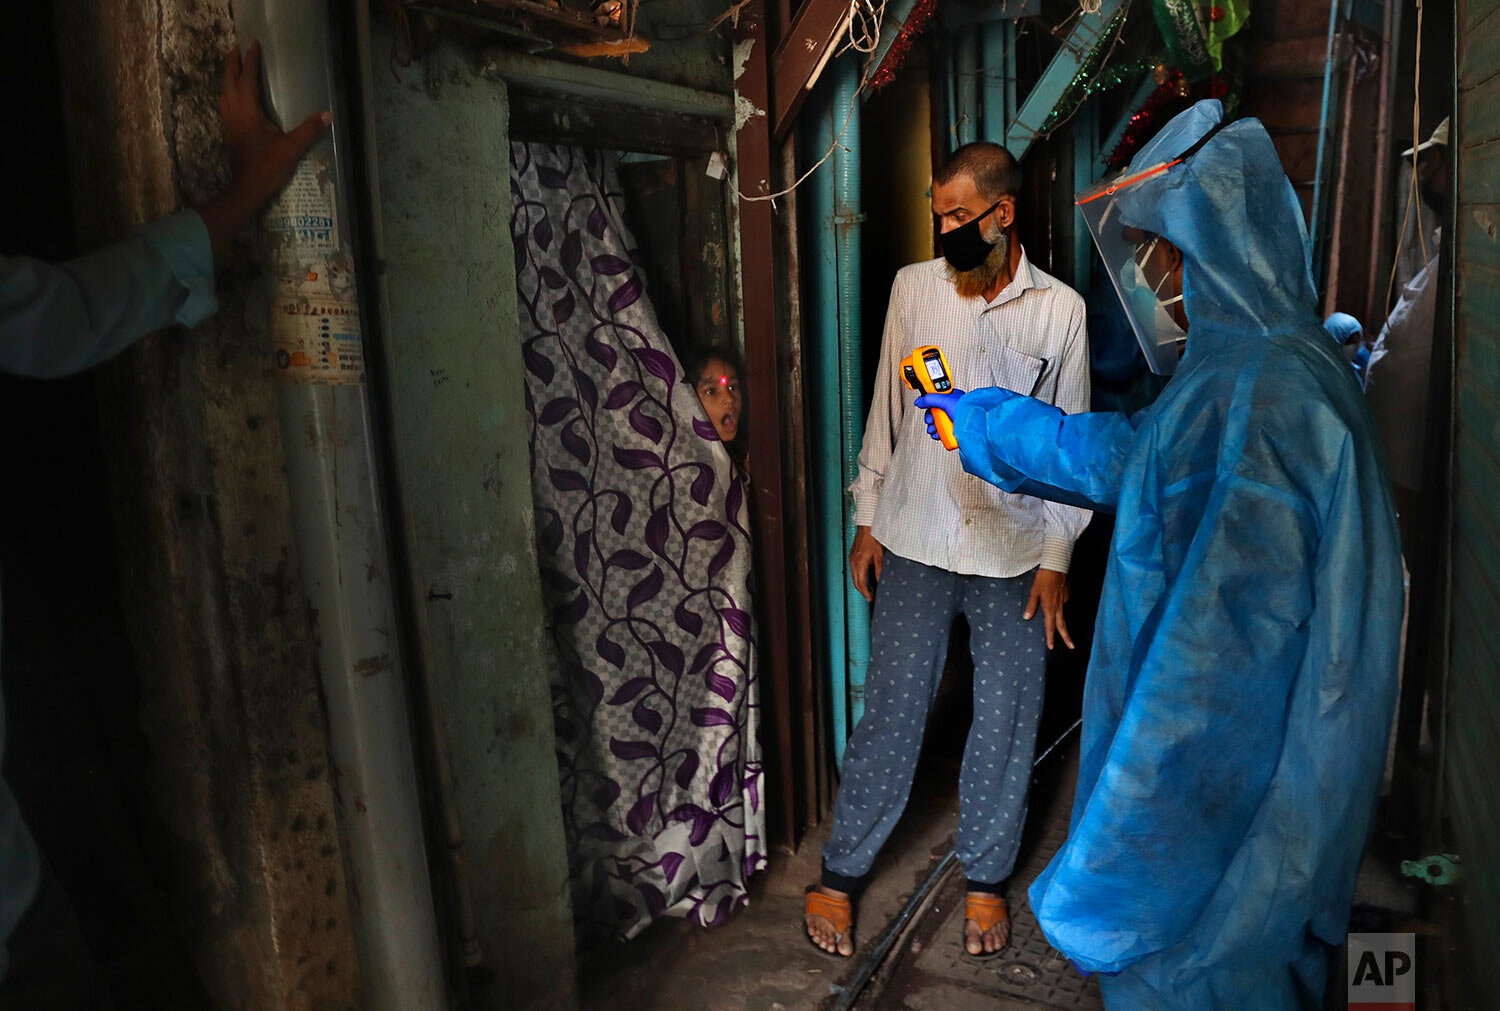  A doctor checks the temperature of a girl in Dharavi, one of Asia's largest slums, during lockdown to prevent the spread of the new coronavirus in Mumbai, India, Monday, April 13, 2020.  (AP Photo/Rafiq Maqbool) 